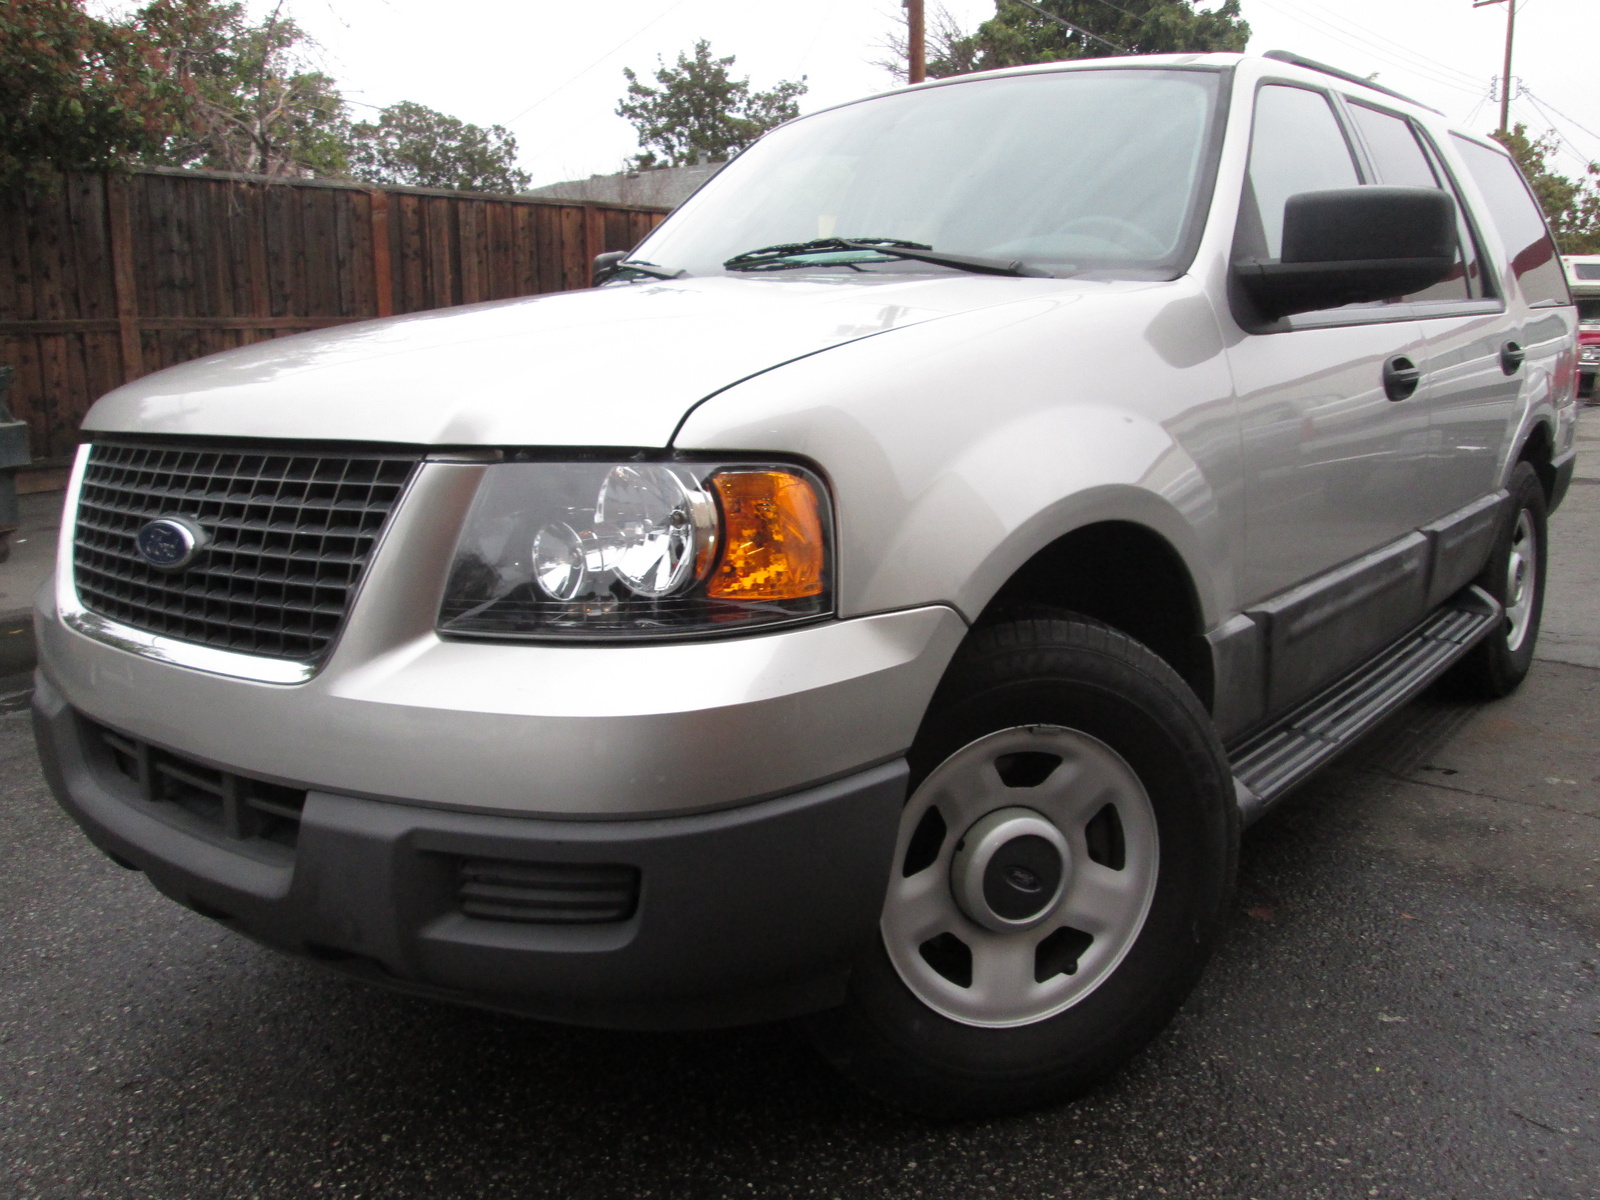 2006 Ford expedition xls review #3